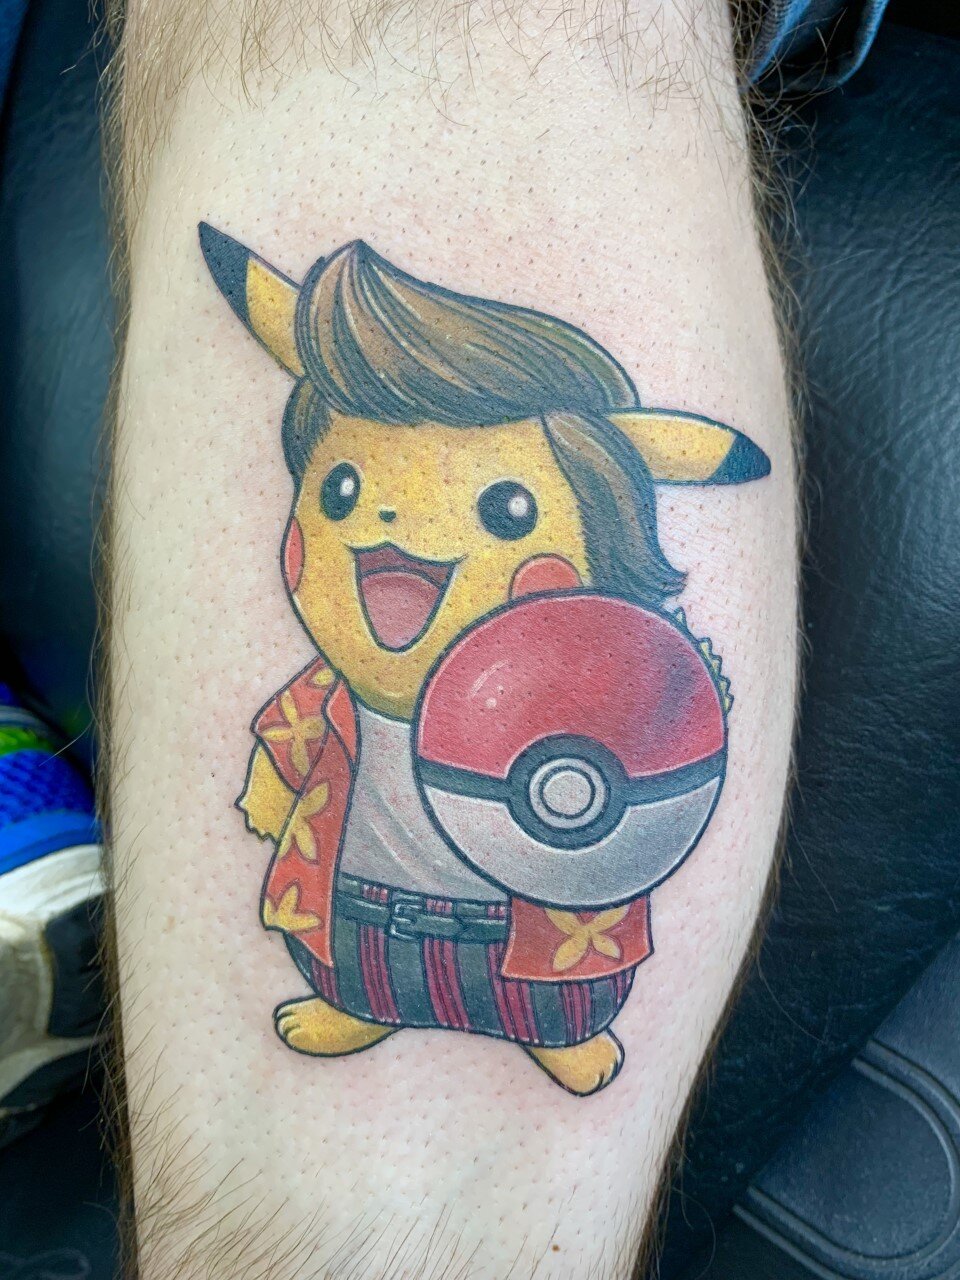 Detective Pikachu from today Artist:... - INK SLAVE TATTOOS | Facebook